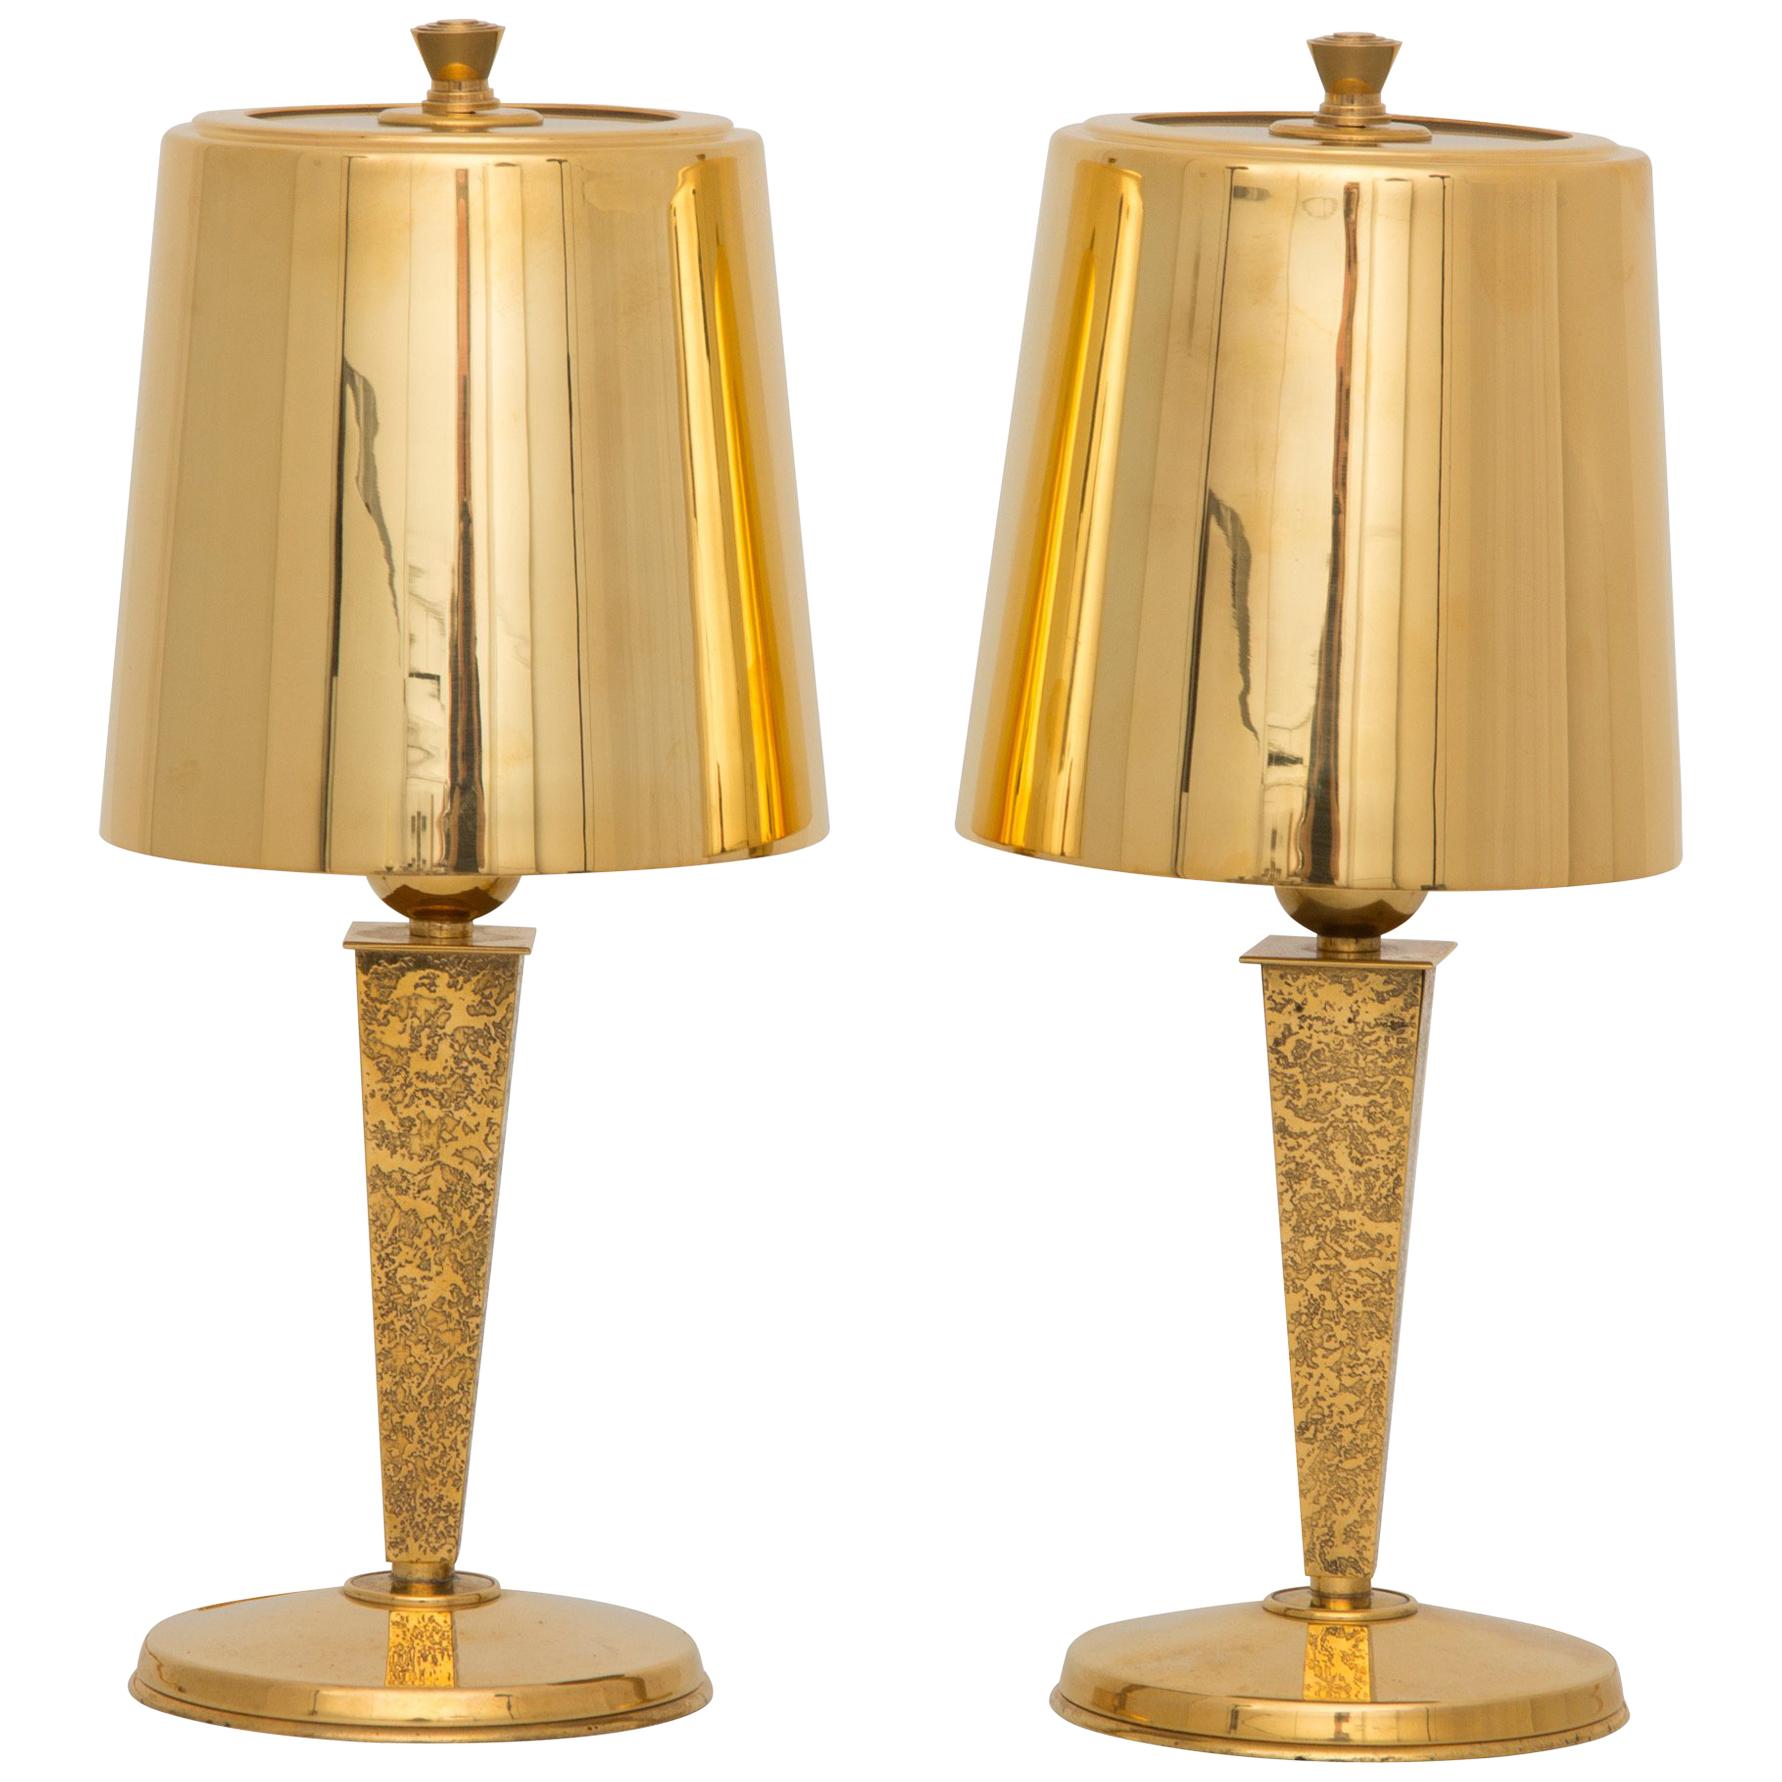 Pair of Hollywood Regency Table Lamps in Gilt Bronze by Genet & Michon For Sale